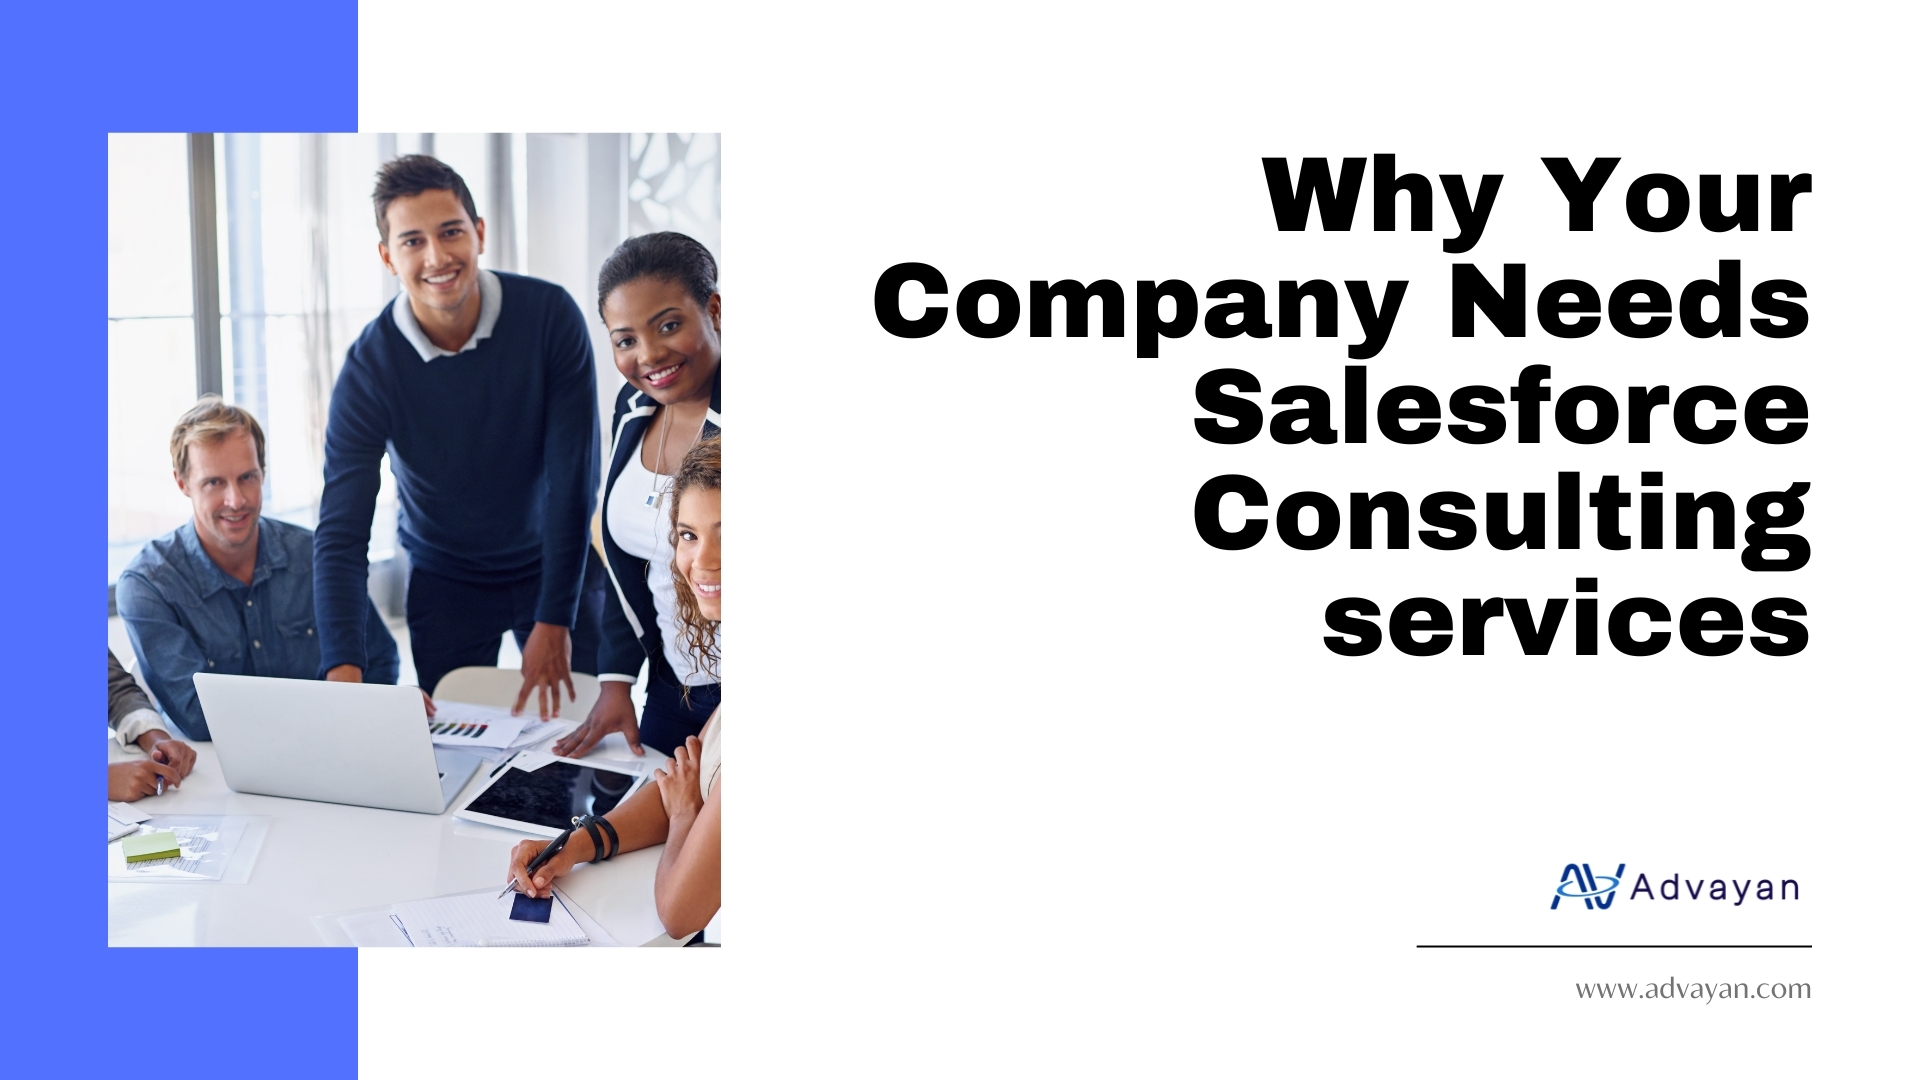 Why Your Company Needs Salesforce Consulting services - Advayan